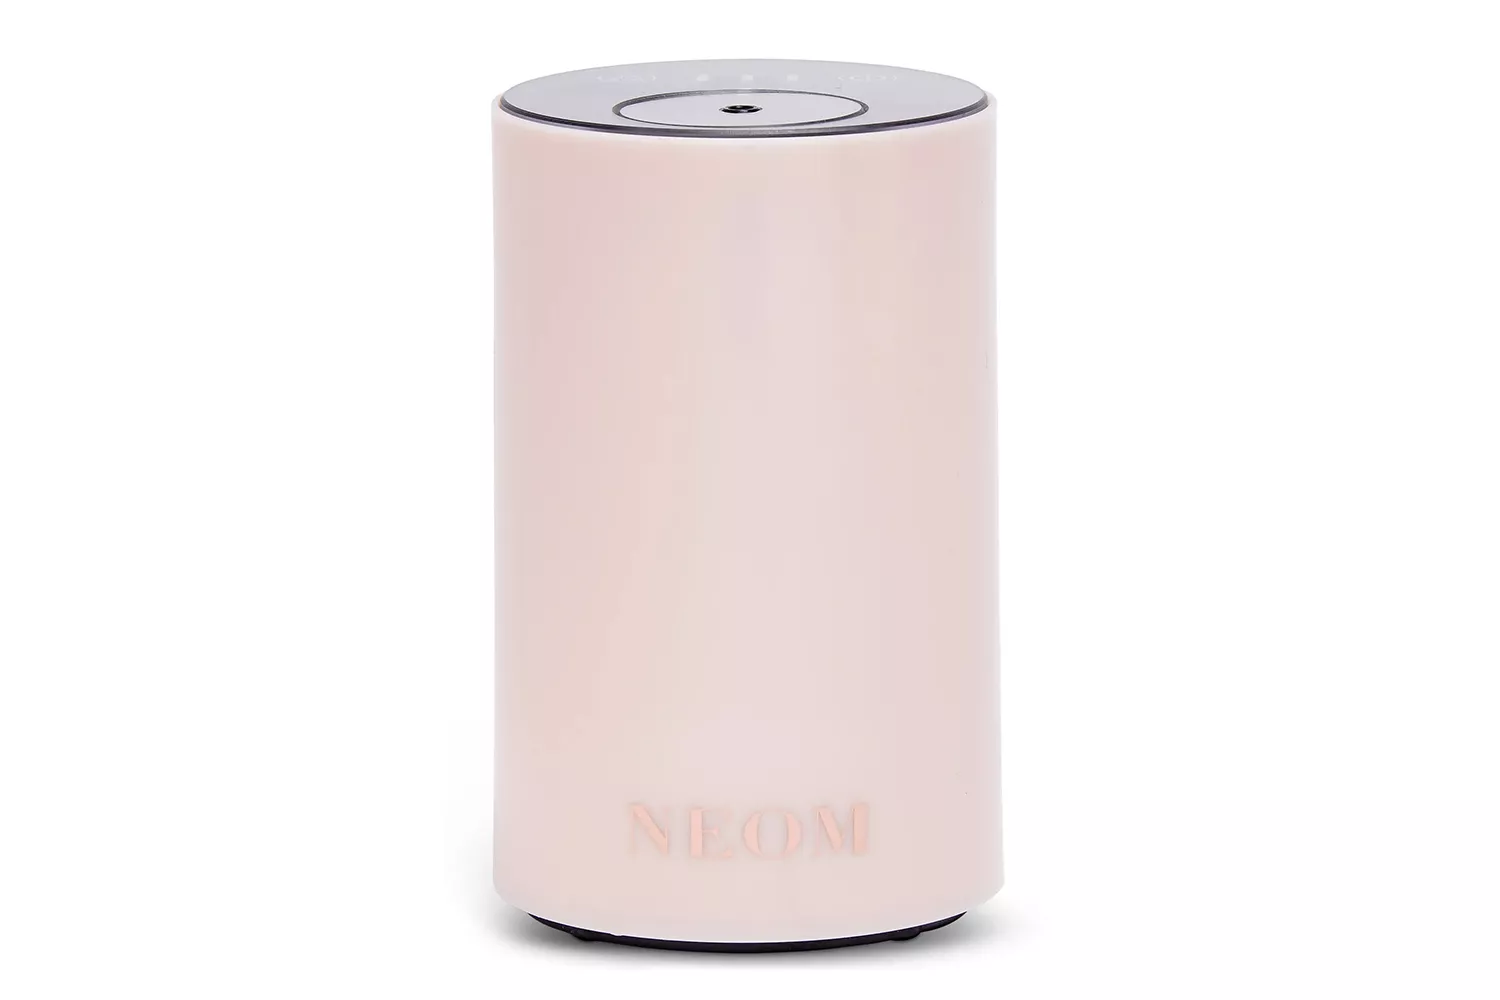 Neom Wellbeing Pod Mini Essential Oil Diffuser Travel Size